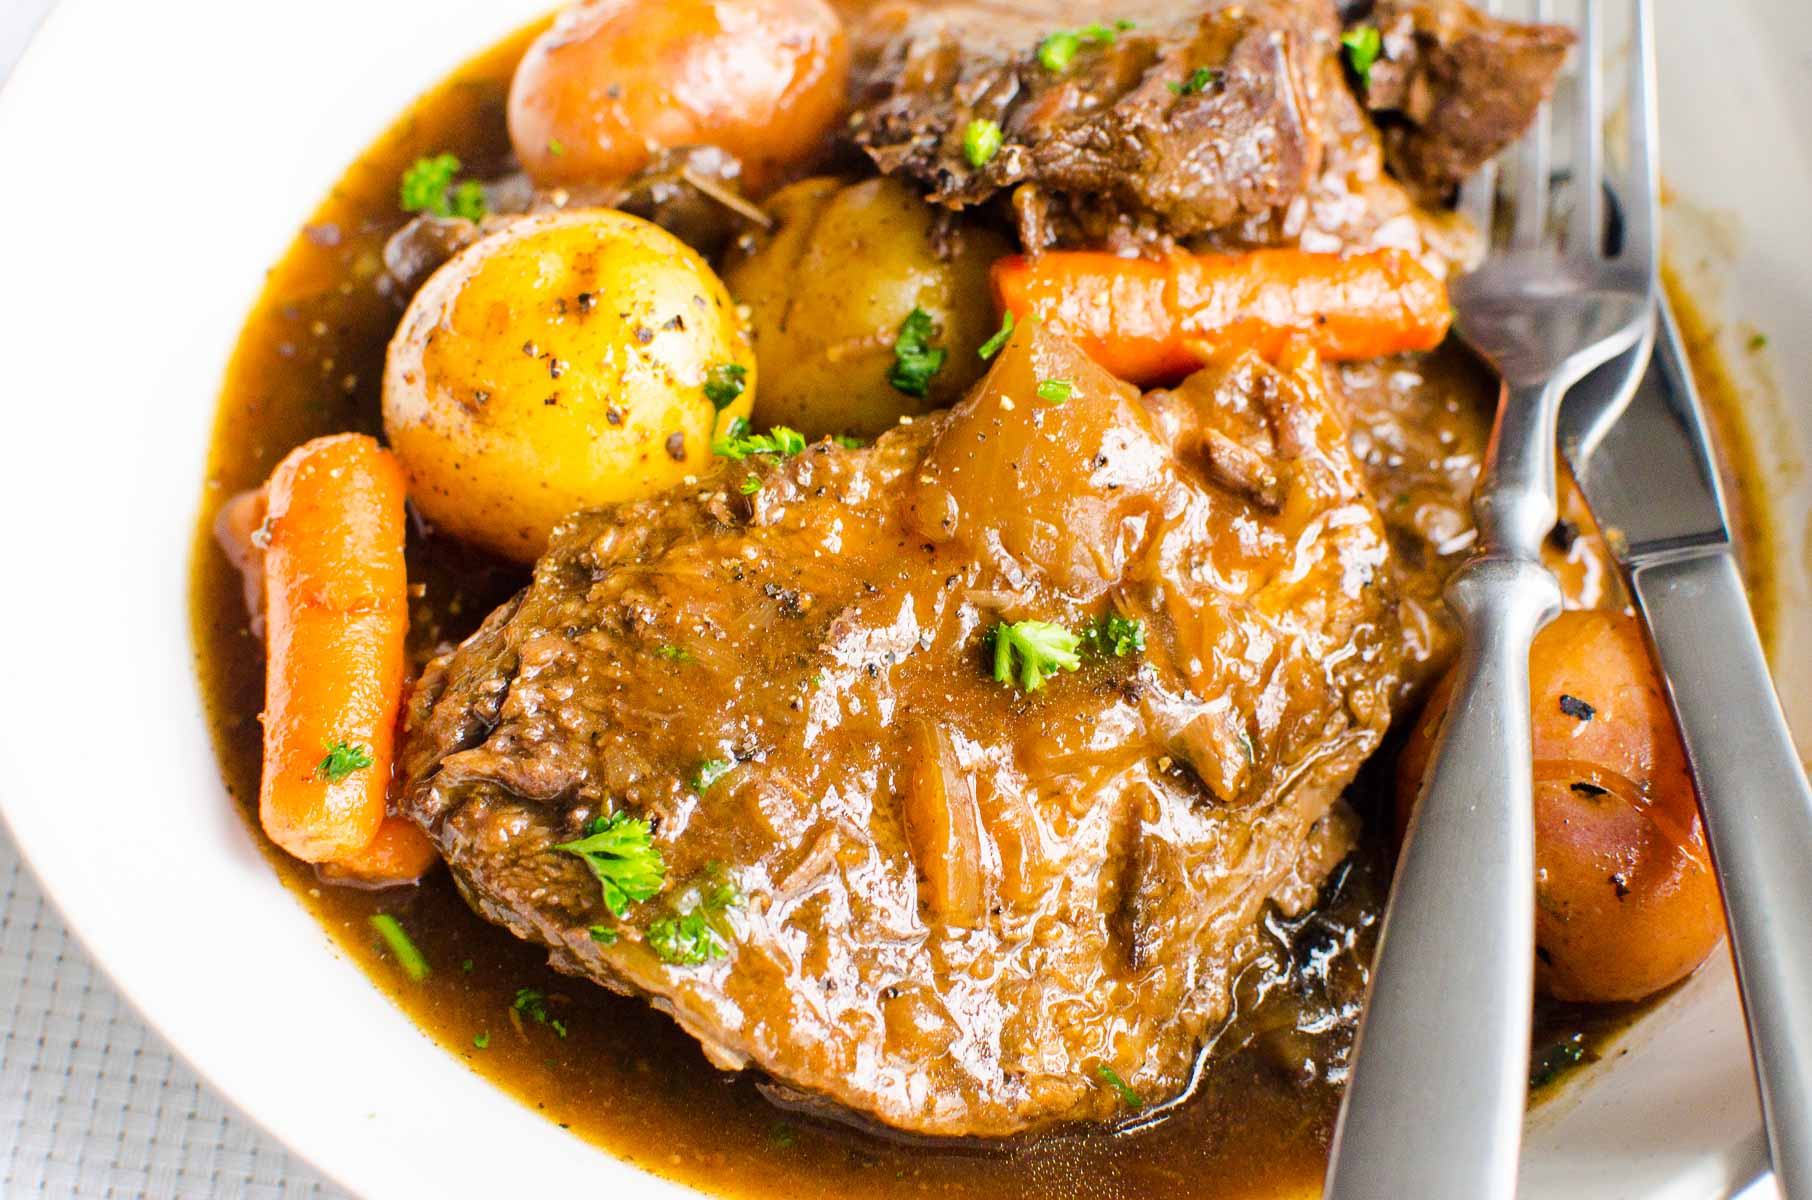 Instant Pot pot roast with carrots, potatoes and parsley on white plate with utensils.